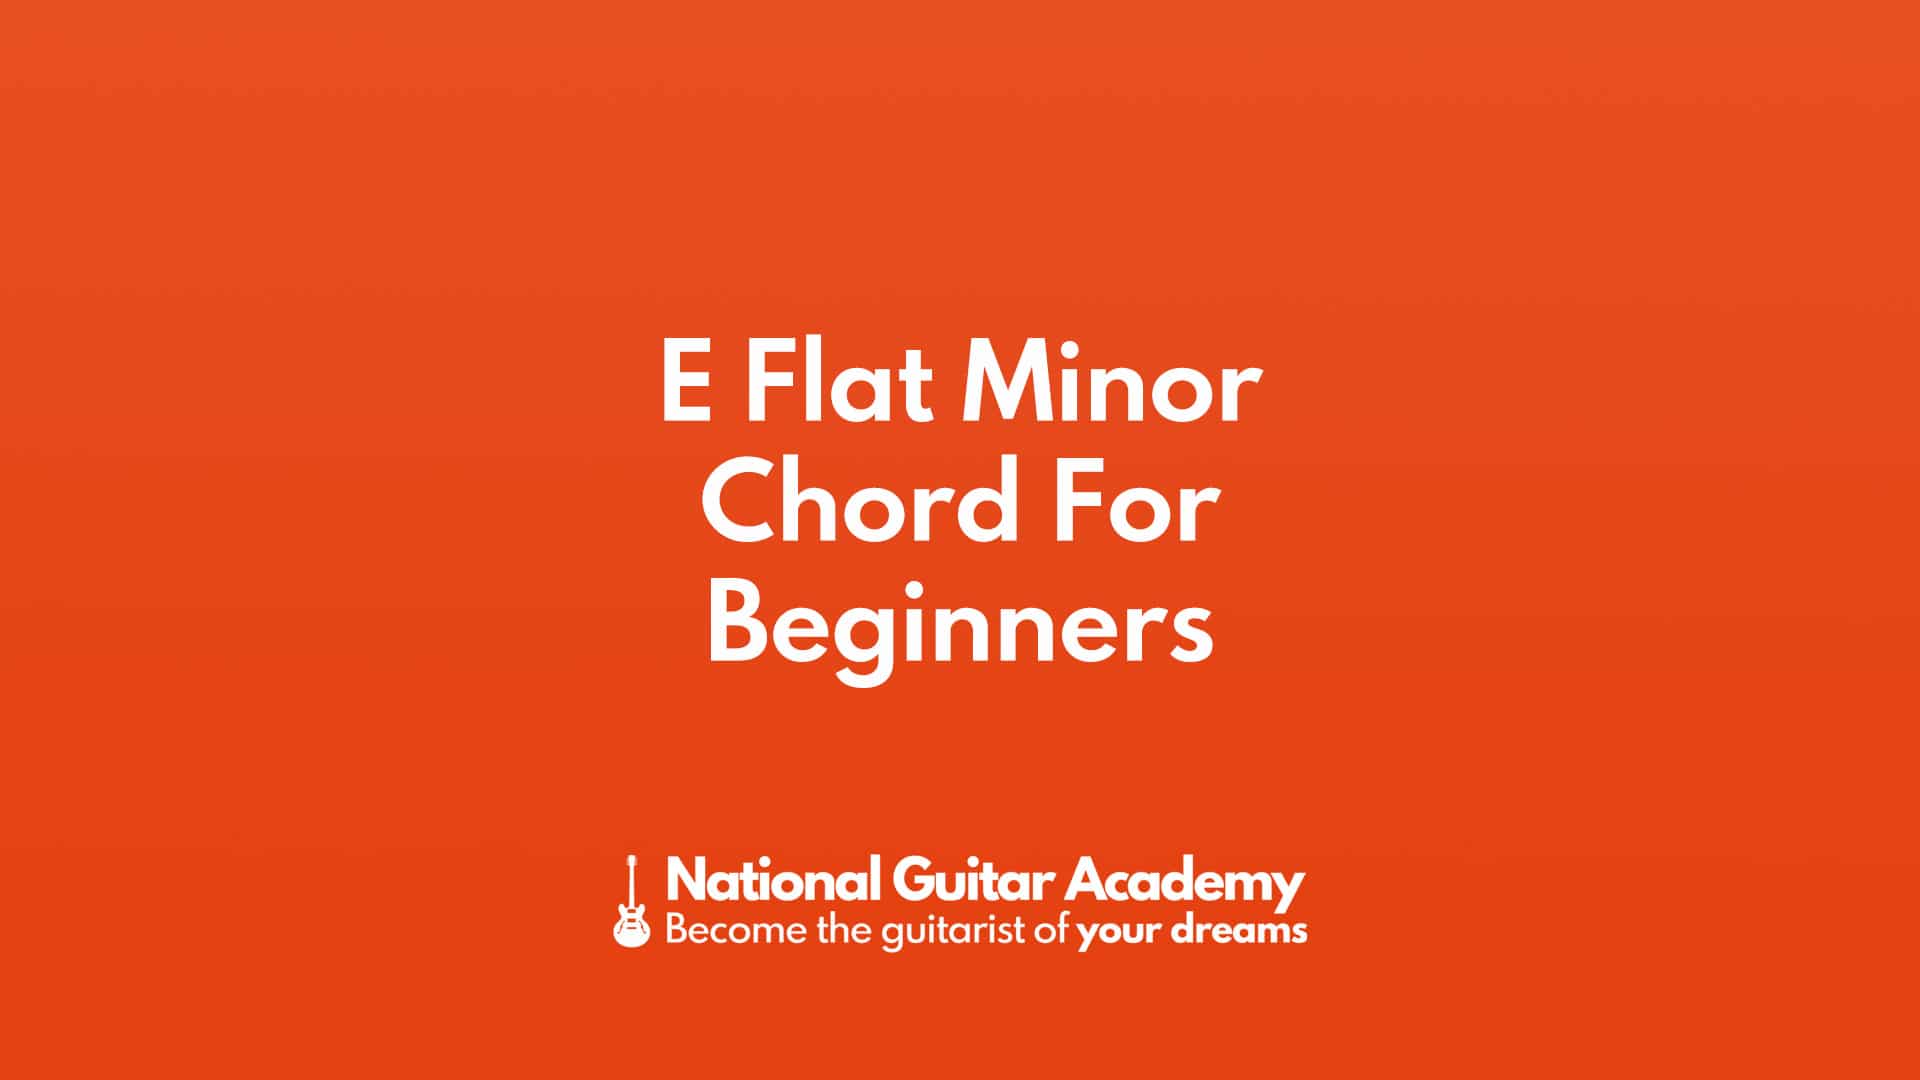 notes in e flat minor chord